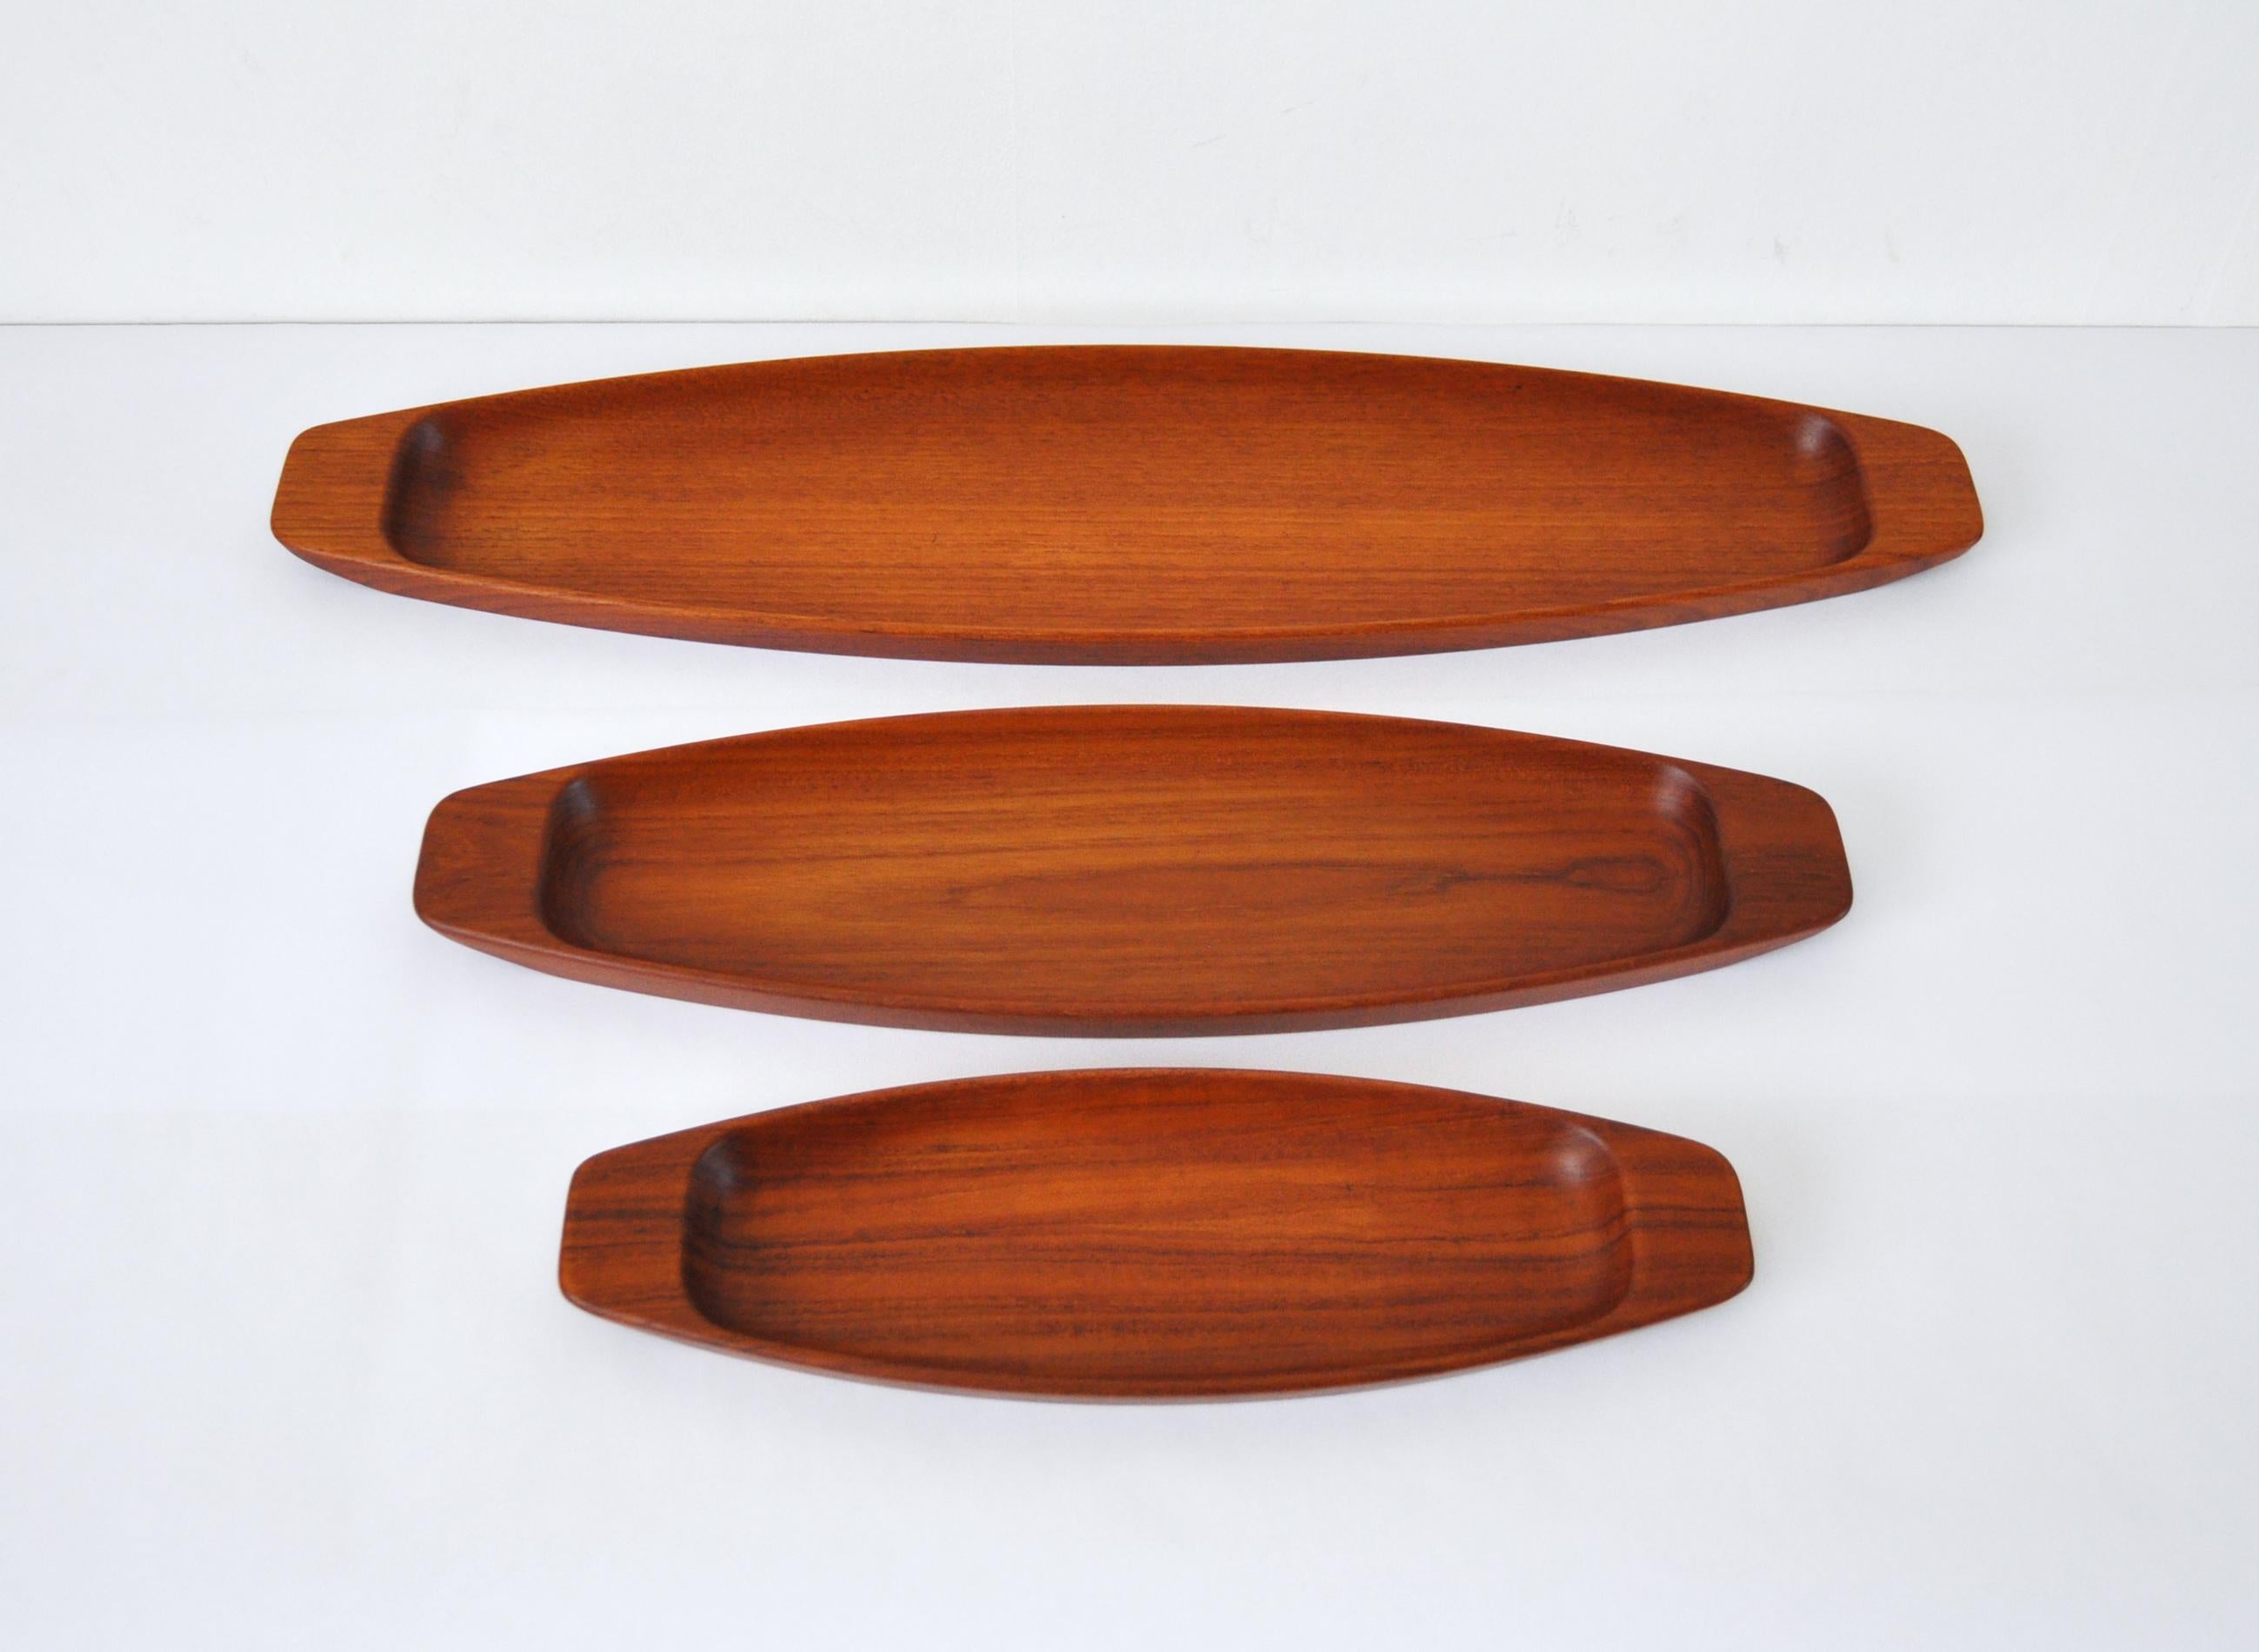 Complete set of three solid teak serving trays by Skjøde Skjern, Denmark 1960s. Designed with a slight size disparity (small, medium, and large) to allow the trays to nest together when not in use.
Very fine vintage condition. 
Measures: 
Small